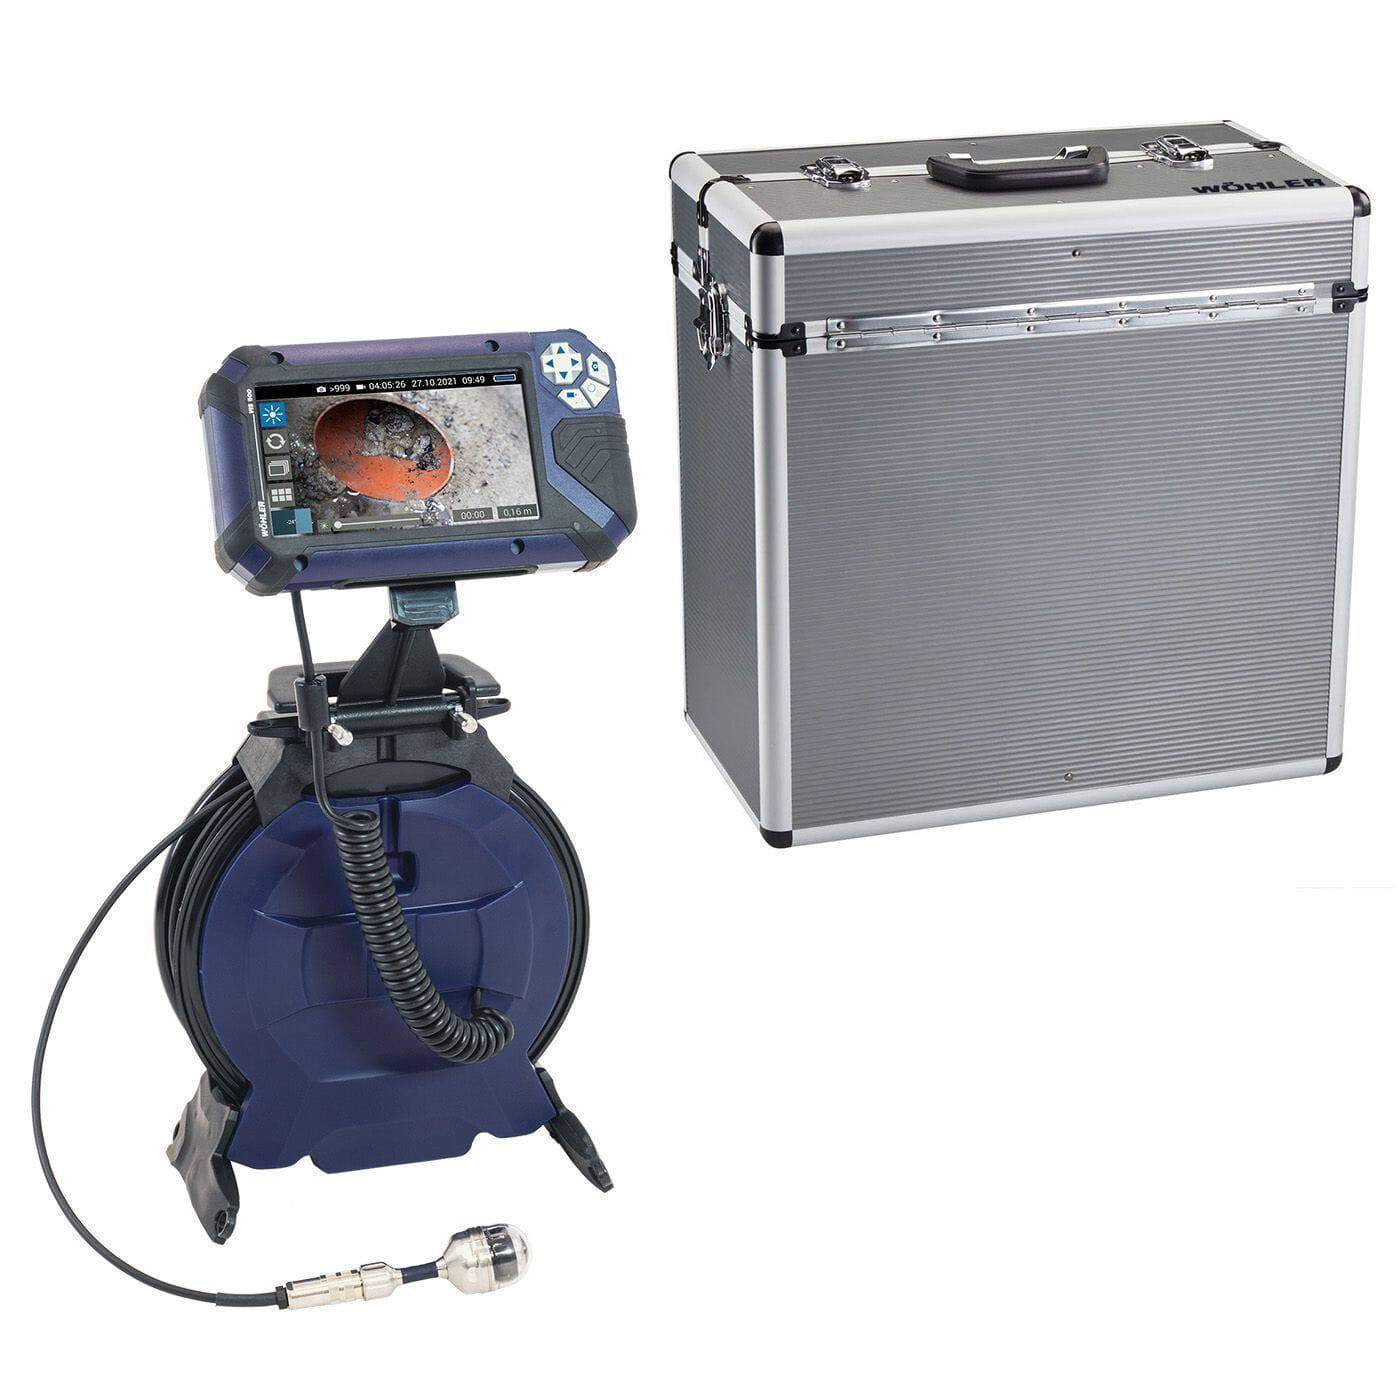 Wohler VIS 500 Chimney Inspection Camera System w/ 1.5" Camera Head and Cable Reel - 12143 - InterTest, Inc.